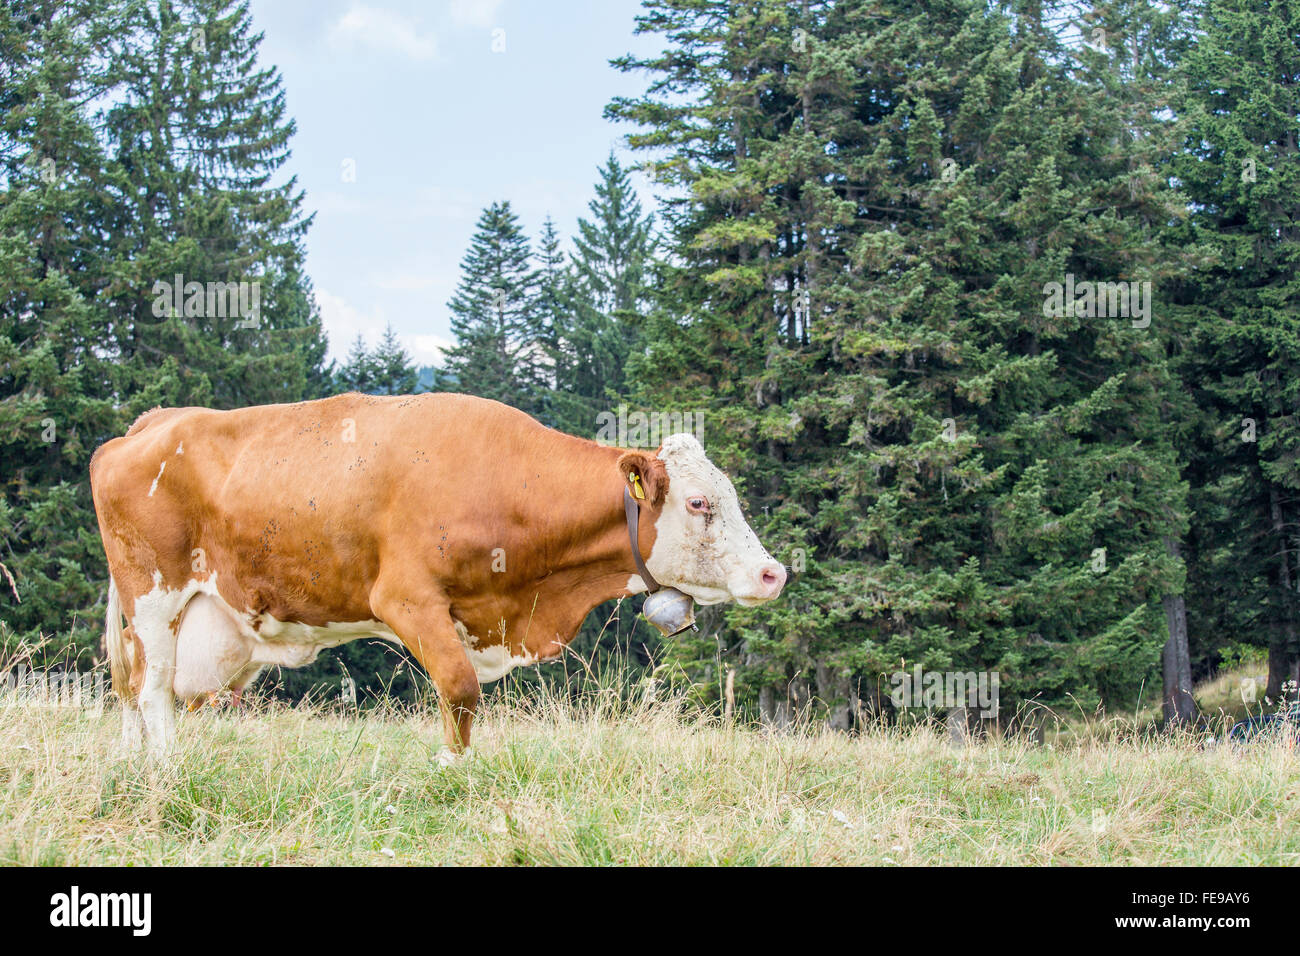 Brown cow with white face walking on a pasture with trees on the background Stock Photo